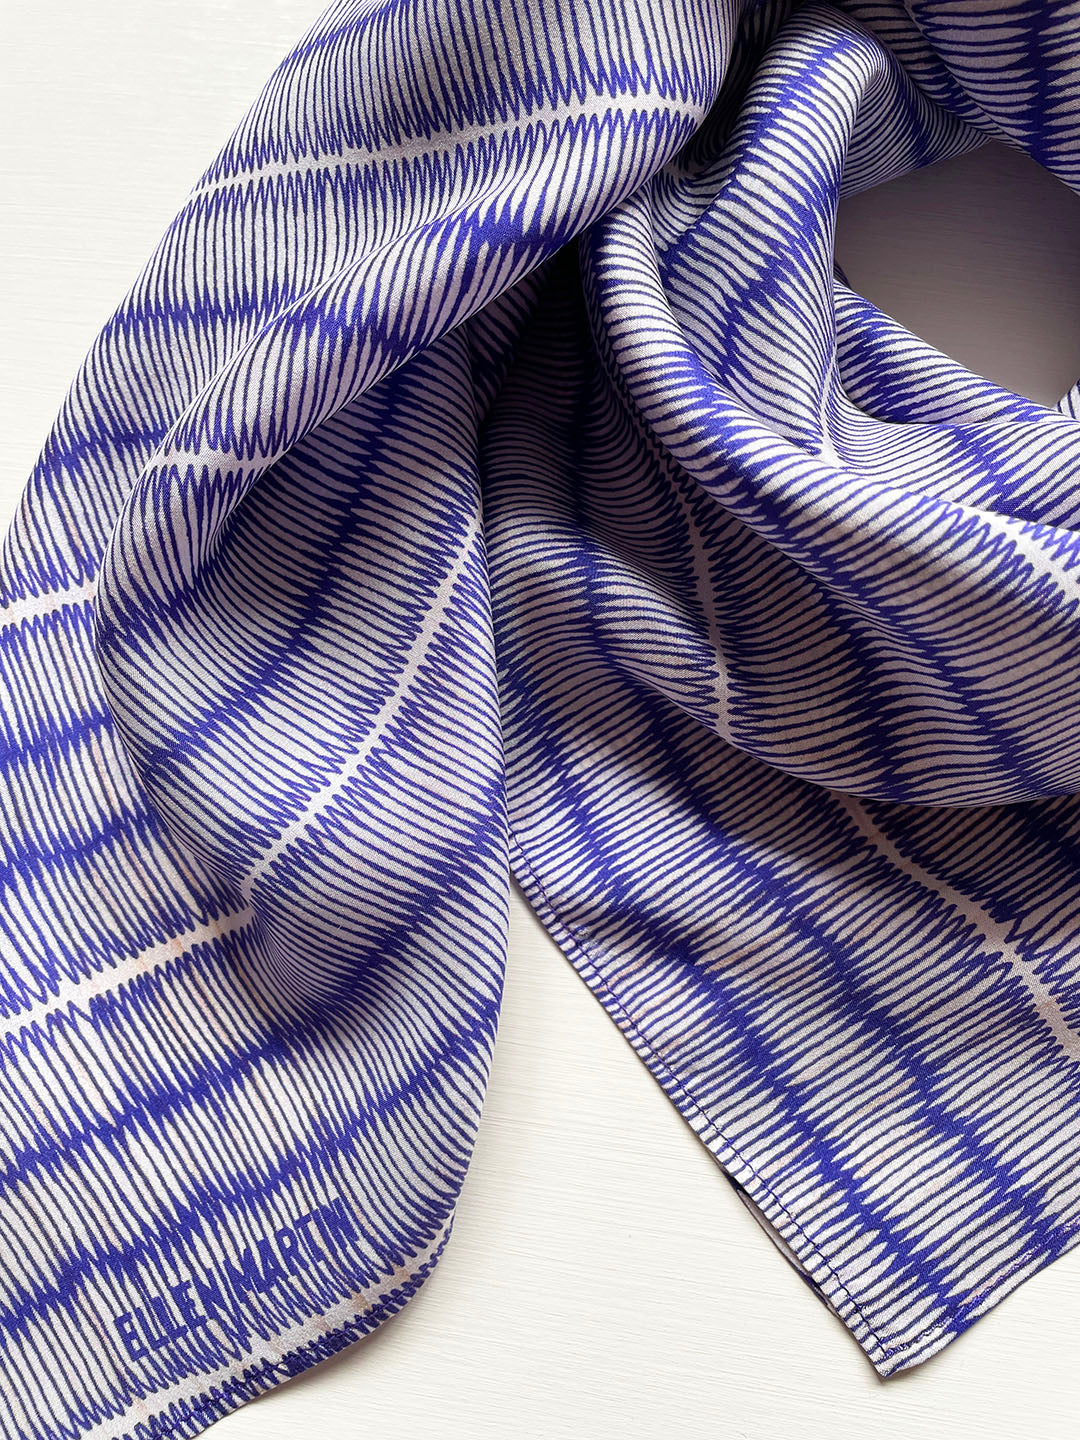 Blue and ivory large silk scarf with intricate hand-drawn print, shown draped on a plain background.